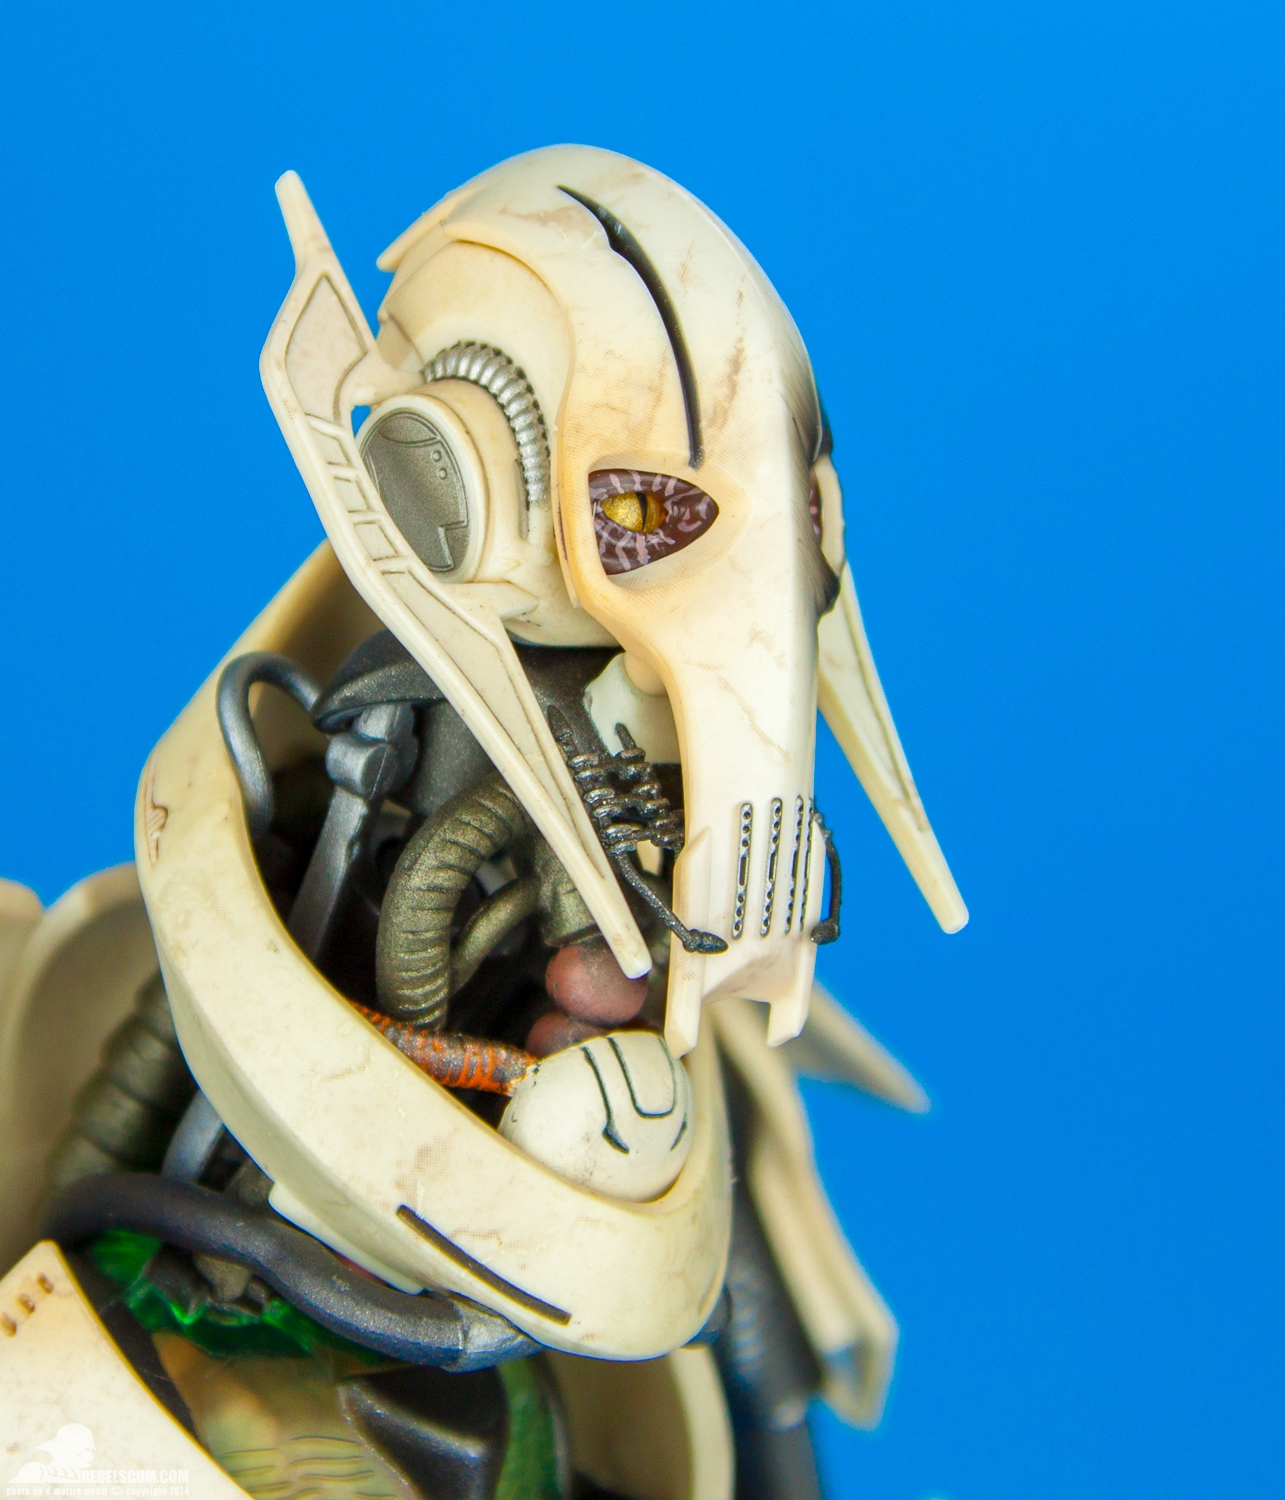 General-Grievous-Sixth-Scale-Figure-Sideshow-Collectibles-014.jpg